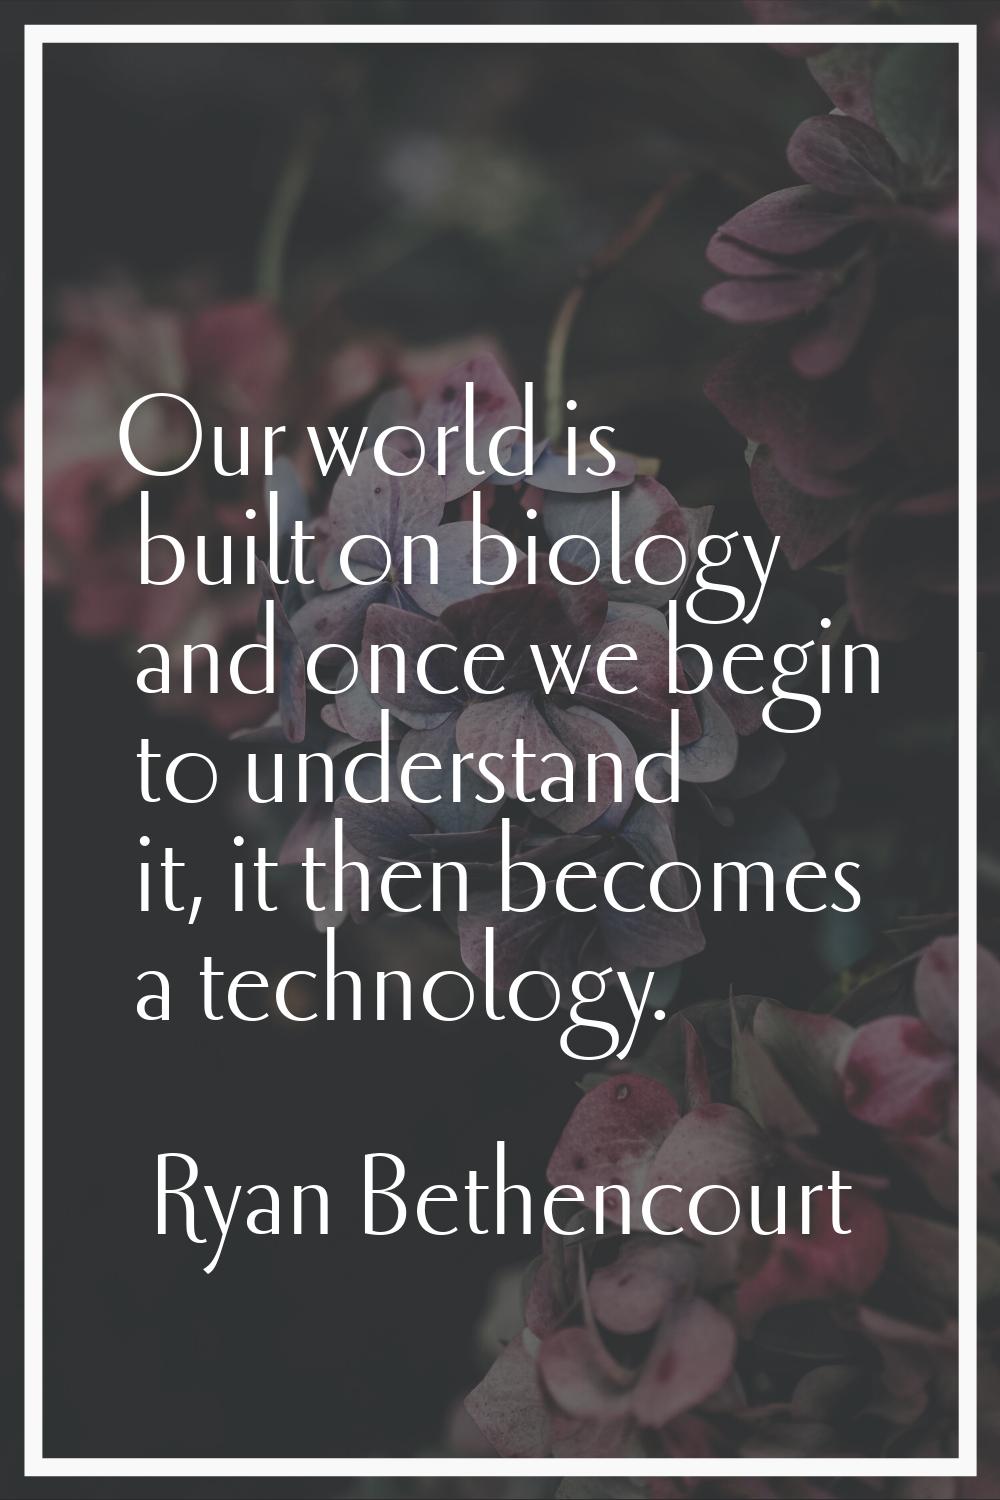 Our world is built on biology and once we begin to understand it, it then becomes a technology.